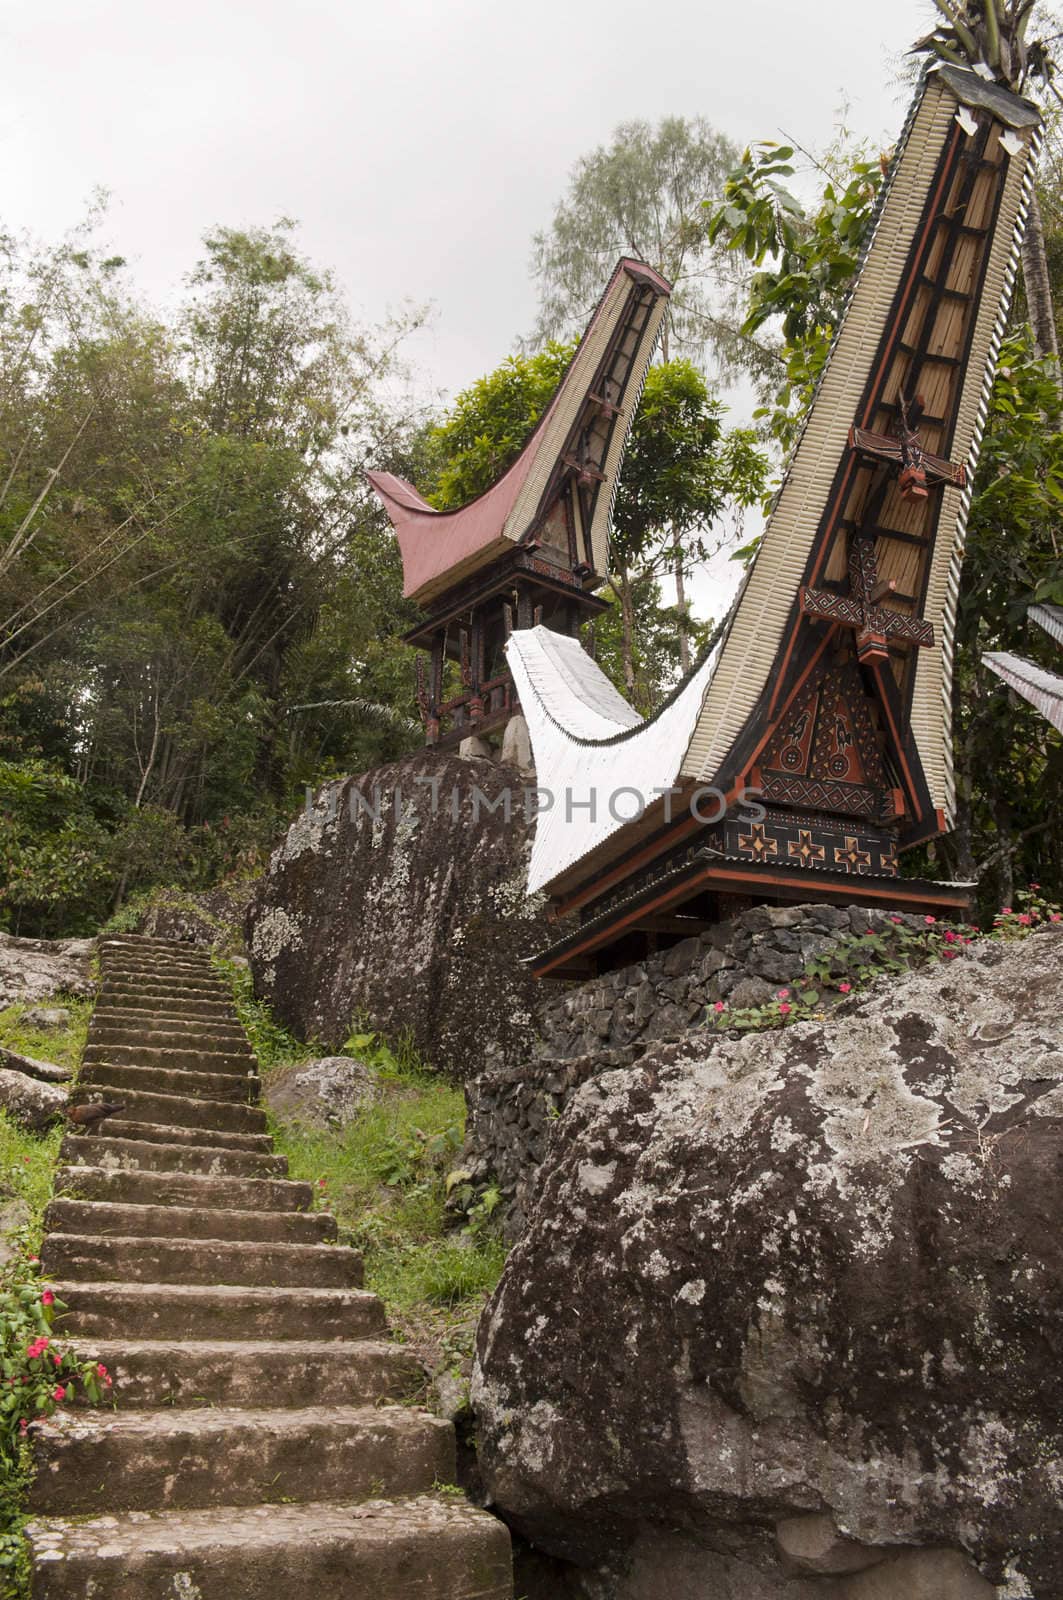 Traditional rural toraja cemetery coffins in a forest